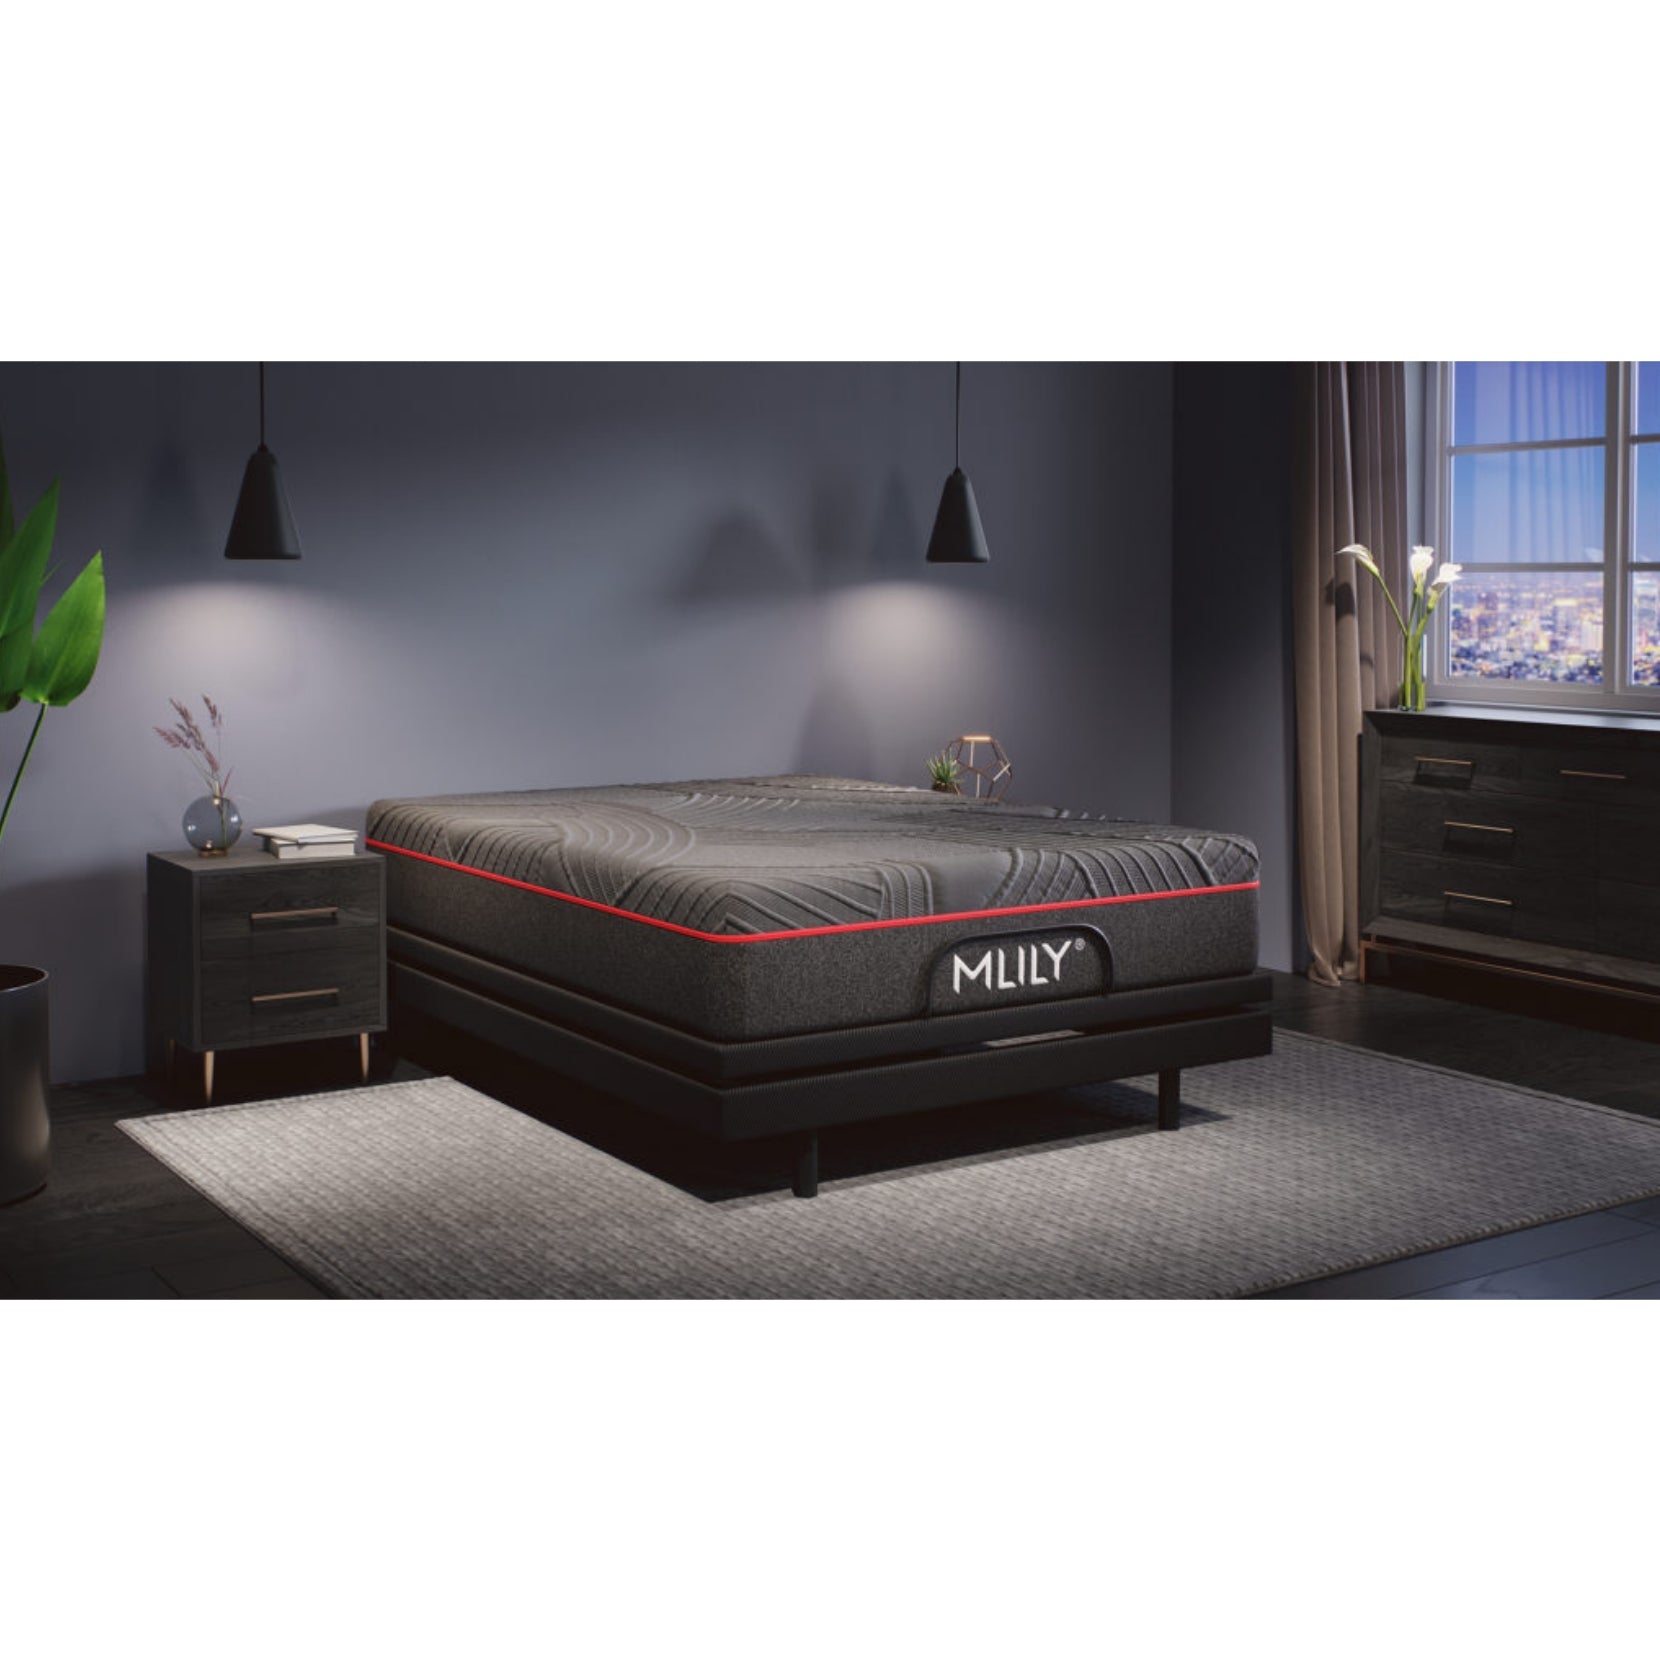 Medium PowerCool 11.5" Hybrid Mattress With Ventilated Memory Foam Pillow(s) And Adjustable Base Featuring Integrated Cooling Fans Inside Of A Bedroom, Flat Position, Corner View